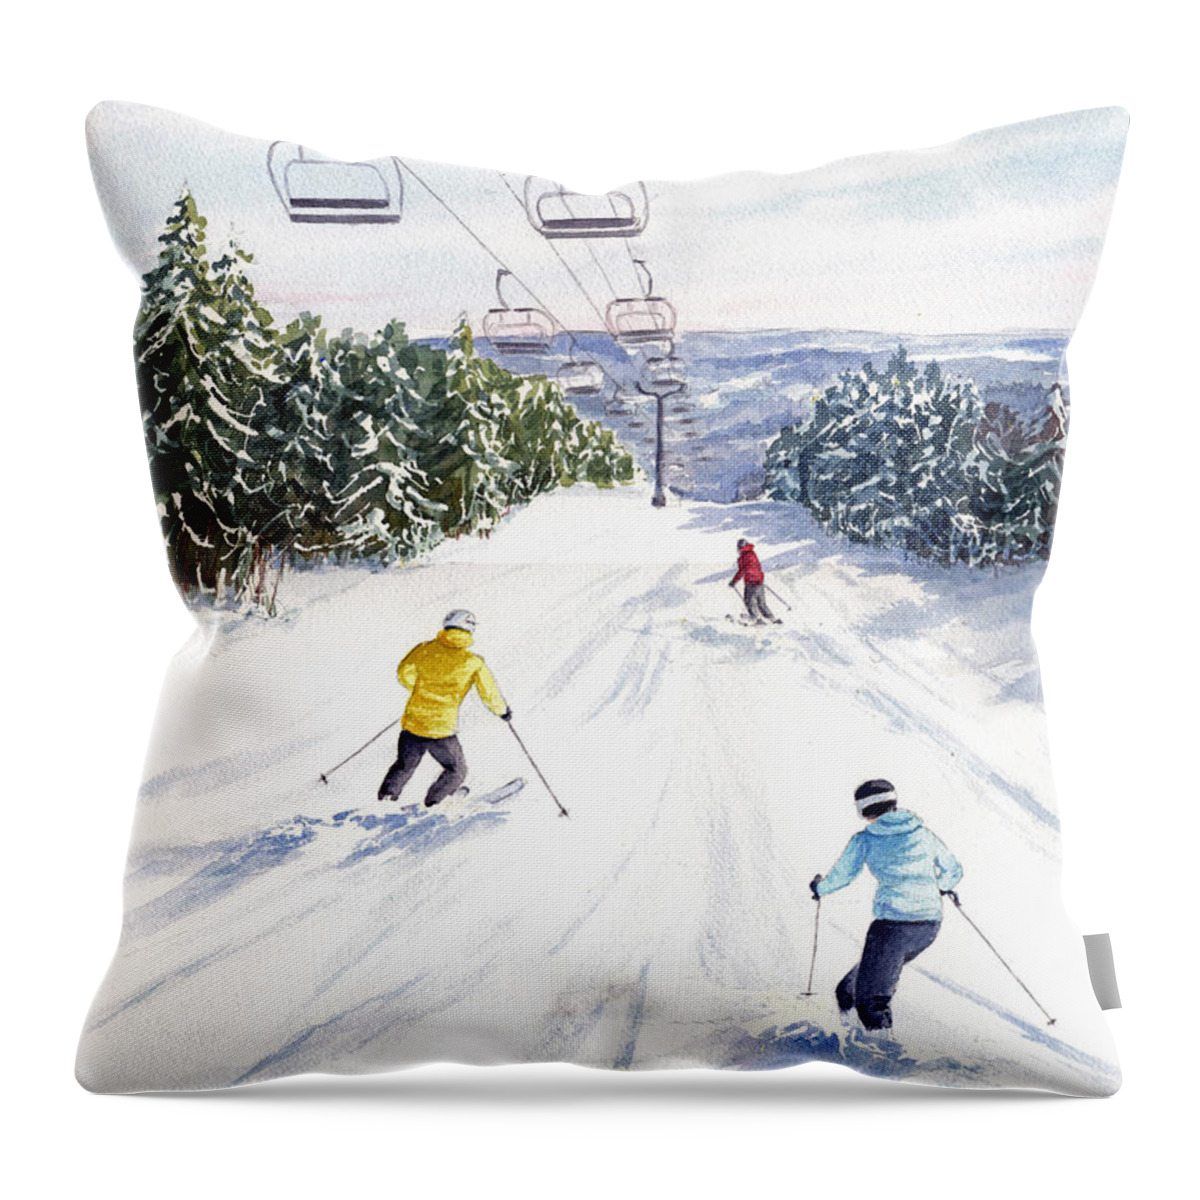 Skiing Throw Pillow featuring the painting New Snow by Vikki Bouffard